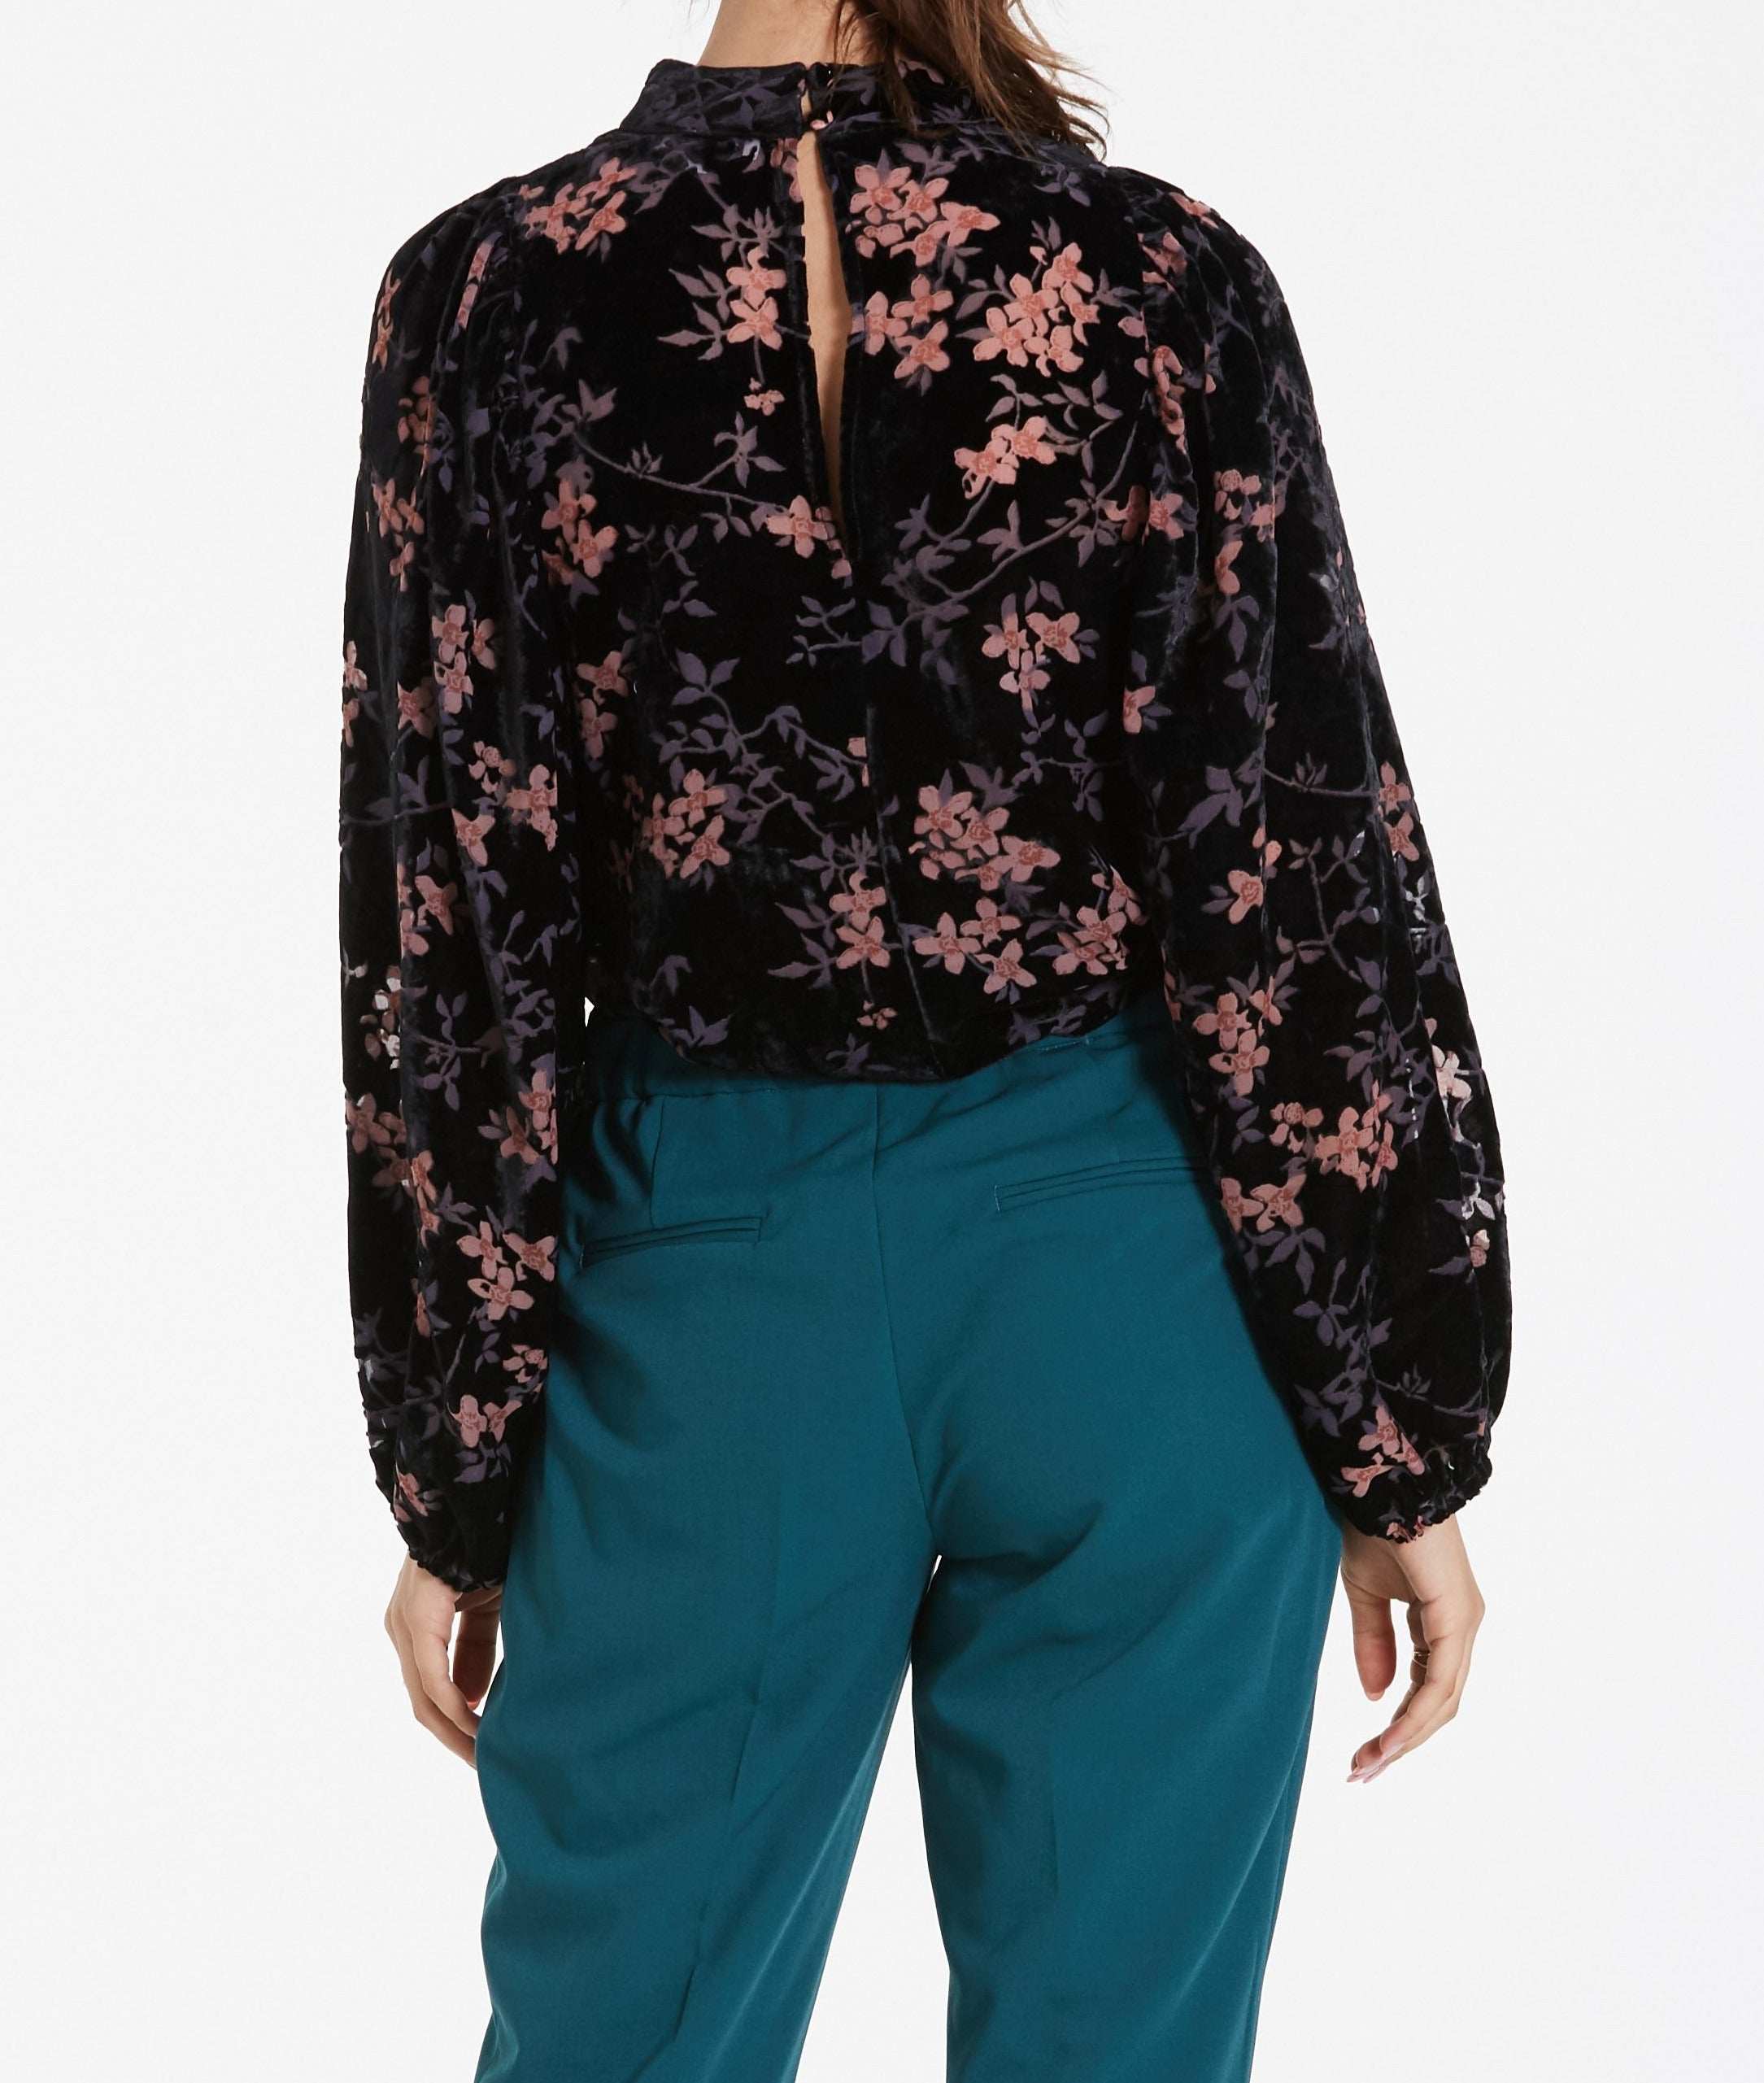 ROSEMARY blouse in cherry blossom burnout